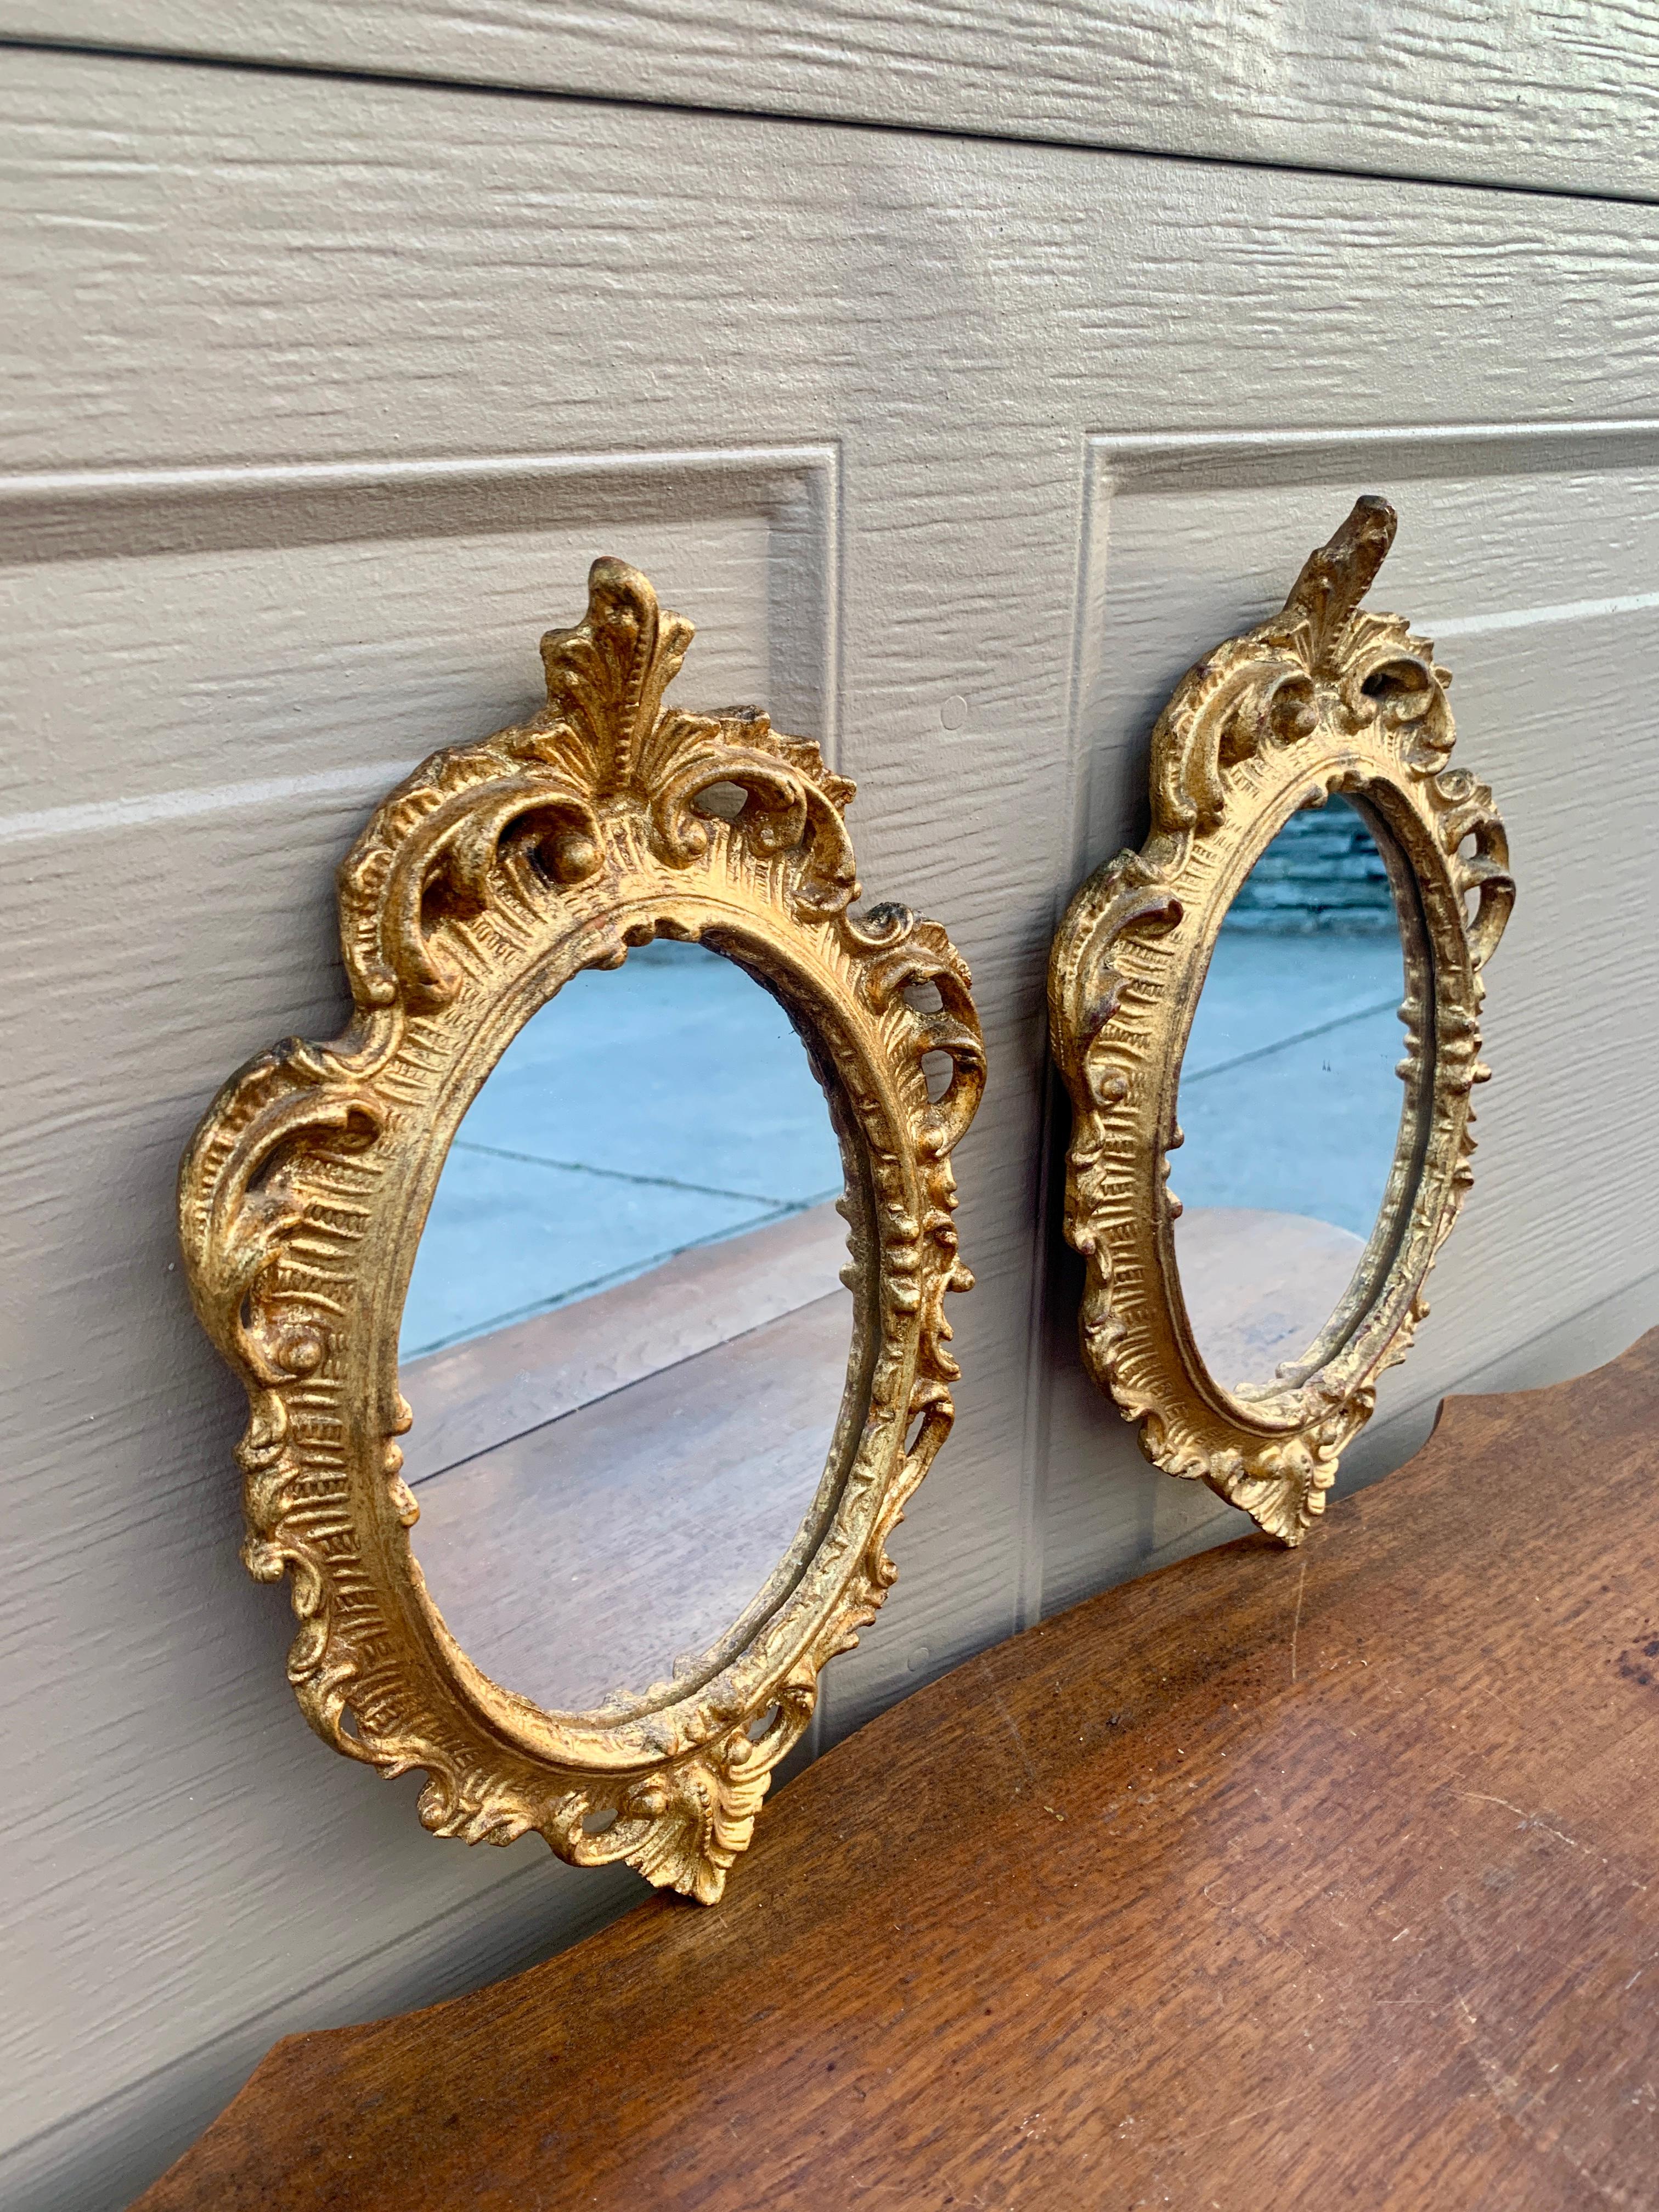 Italian Florentine Baroque Gold Giltwood Wall Mirrors, Pair In Good Condition For Sale In Elkhart, IN